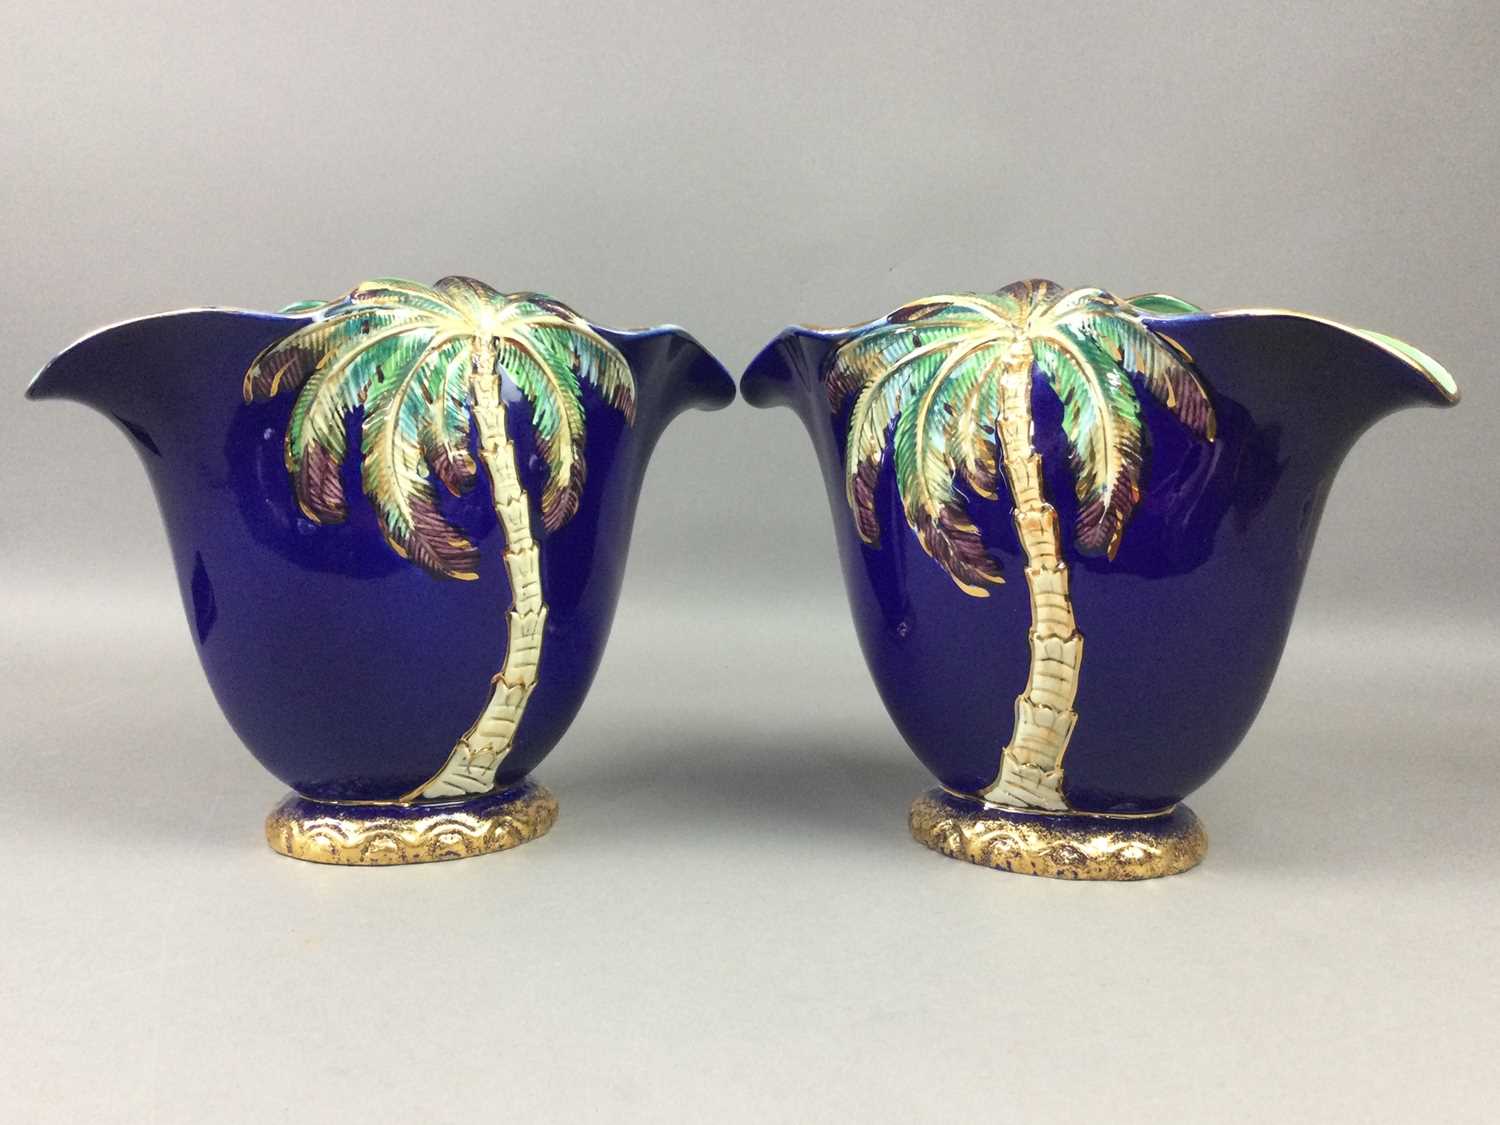 A PAIR OF BESWICK VASES